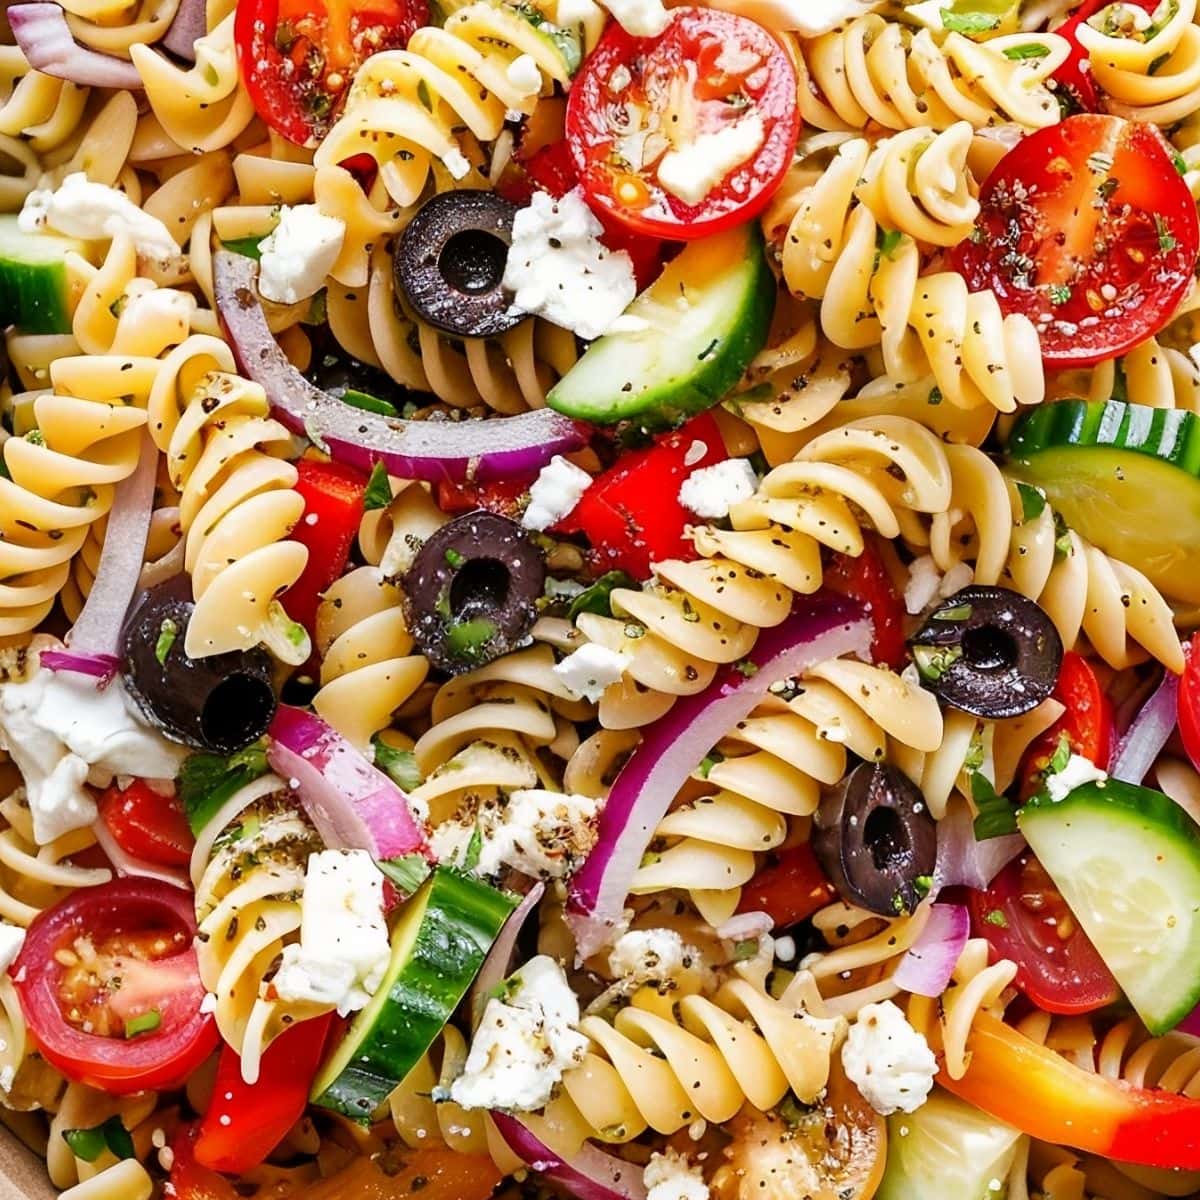 Super Close up of Greek Pasta Salad with Black Olives, Tomatoes, Cucumbers, Red Onion, Feta, and Rotini Pasta with Herbs and Seasonings